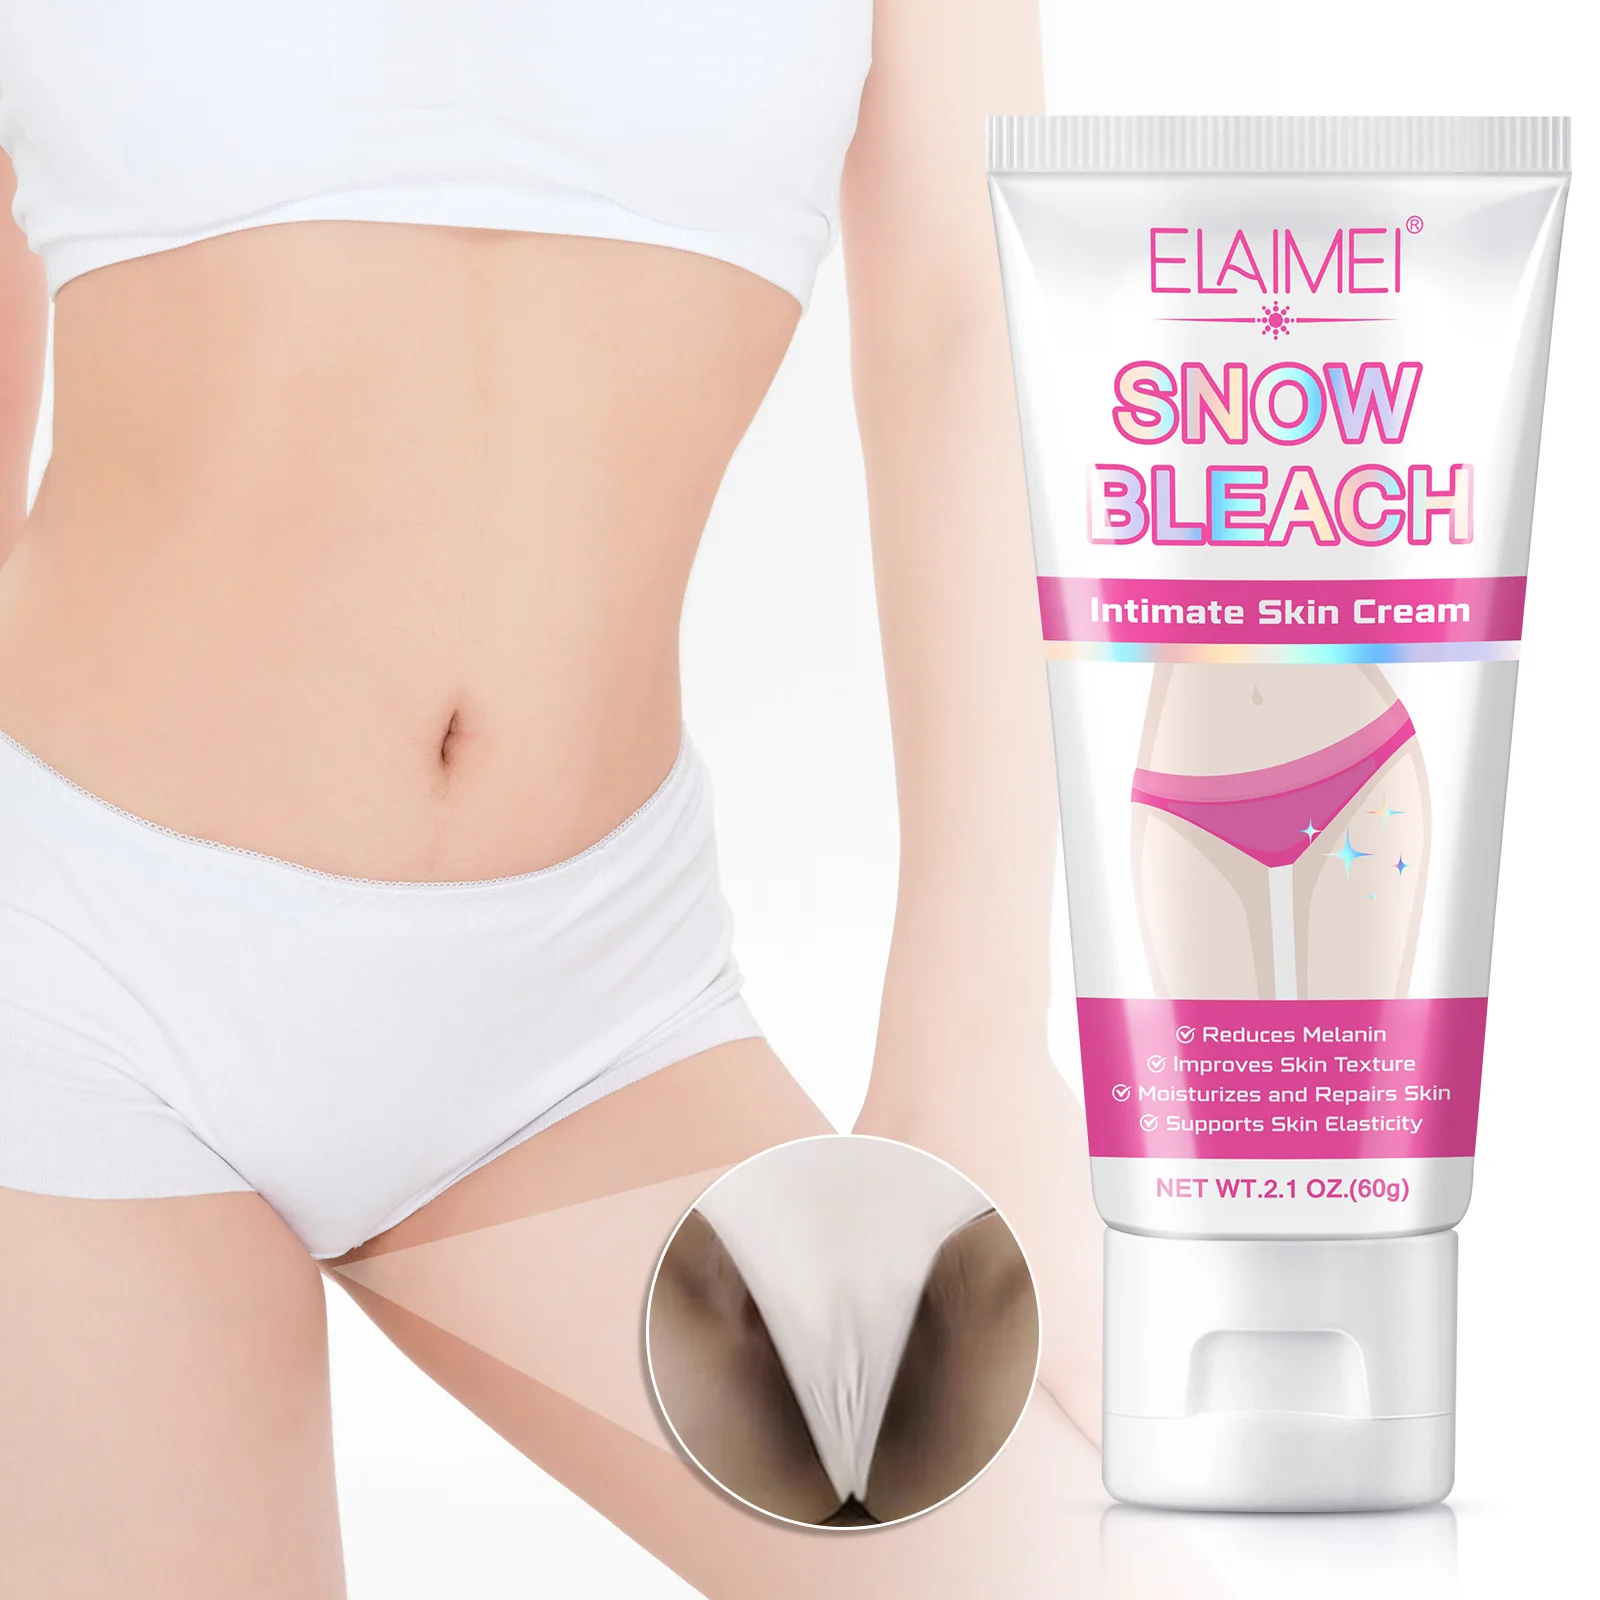 

Private Label Smooth Skin Face And Body Brighten Whitening Cream Snow White Bleach Cream for Private Part Intimate Areas